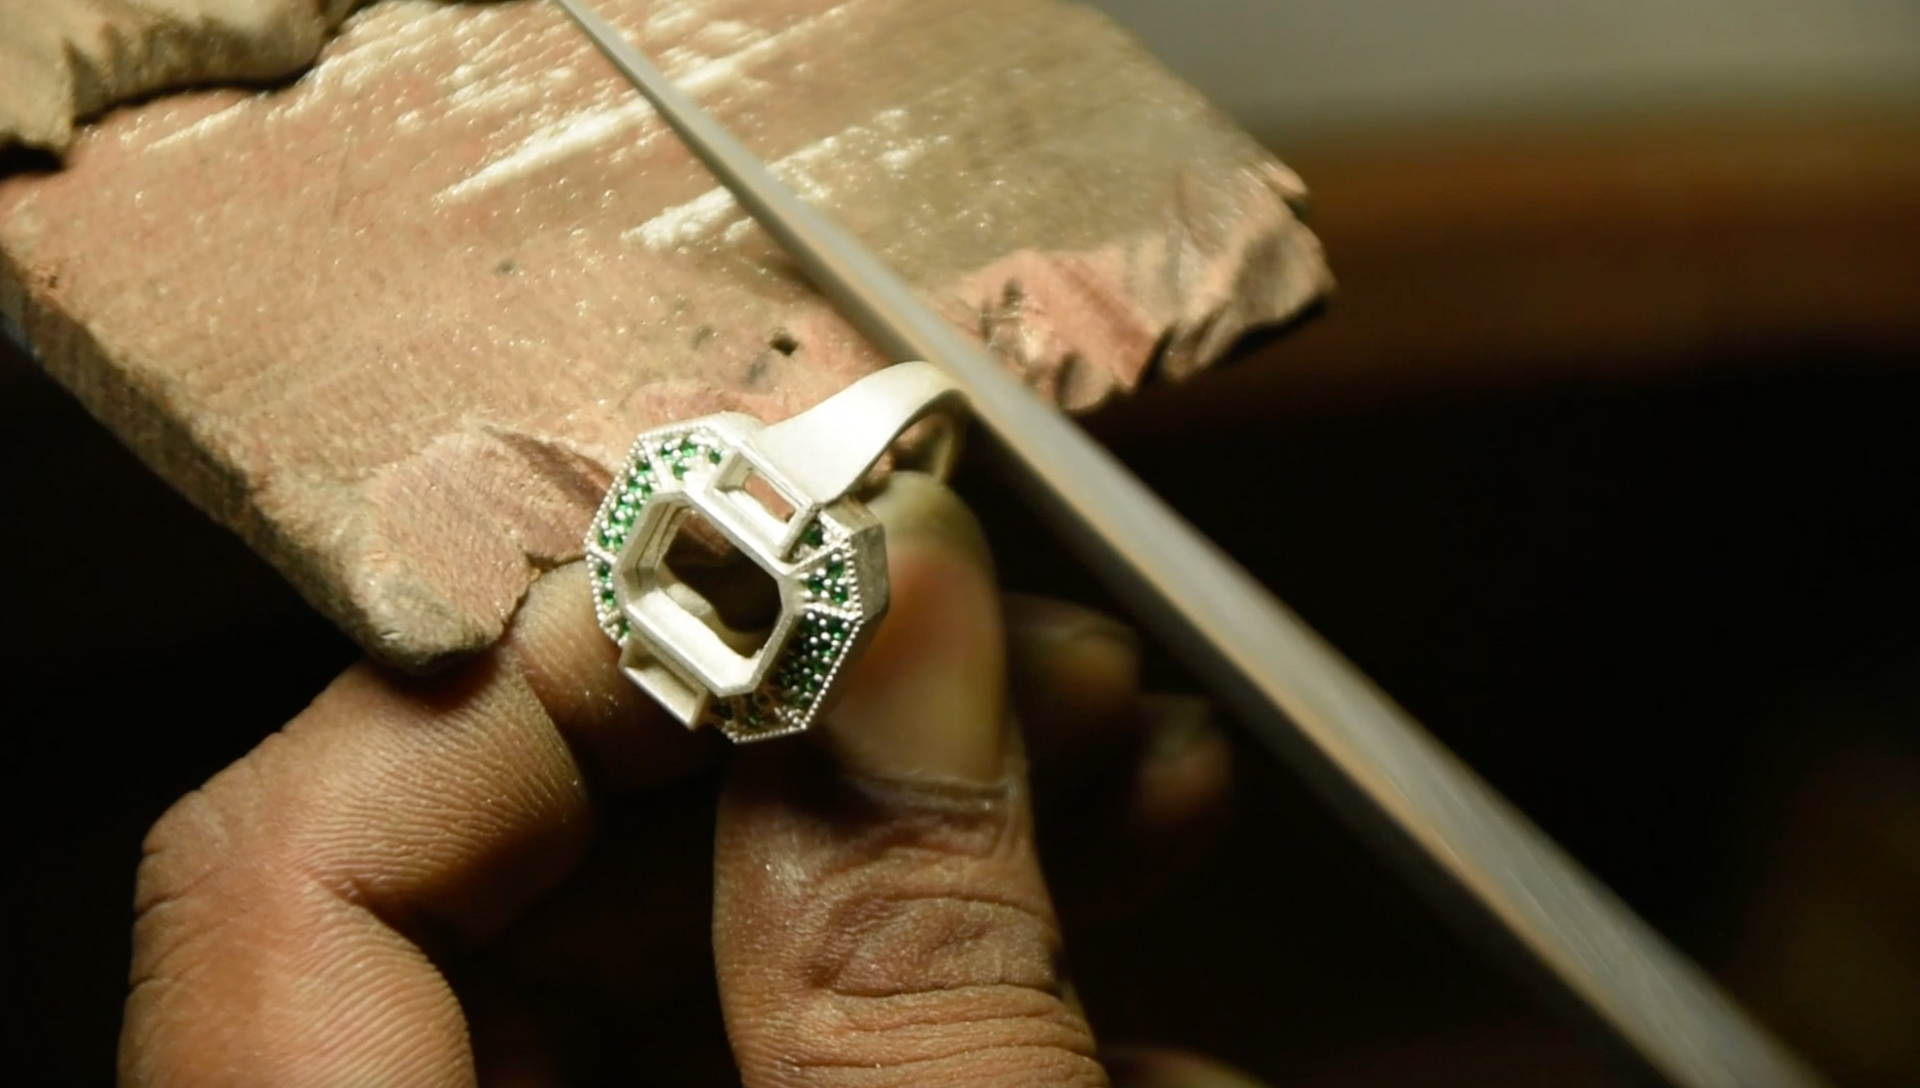 Load video: Know-how: Célestine ring manufacturing